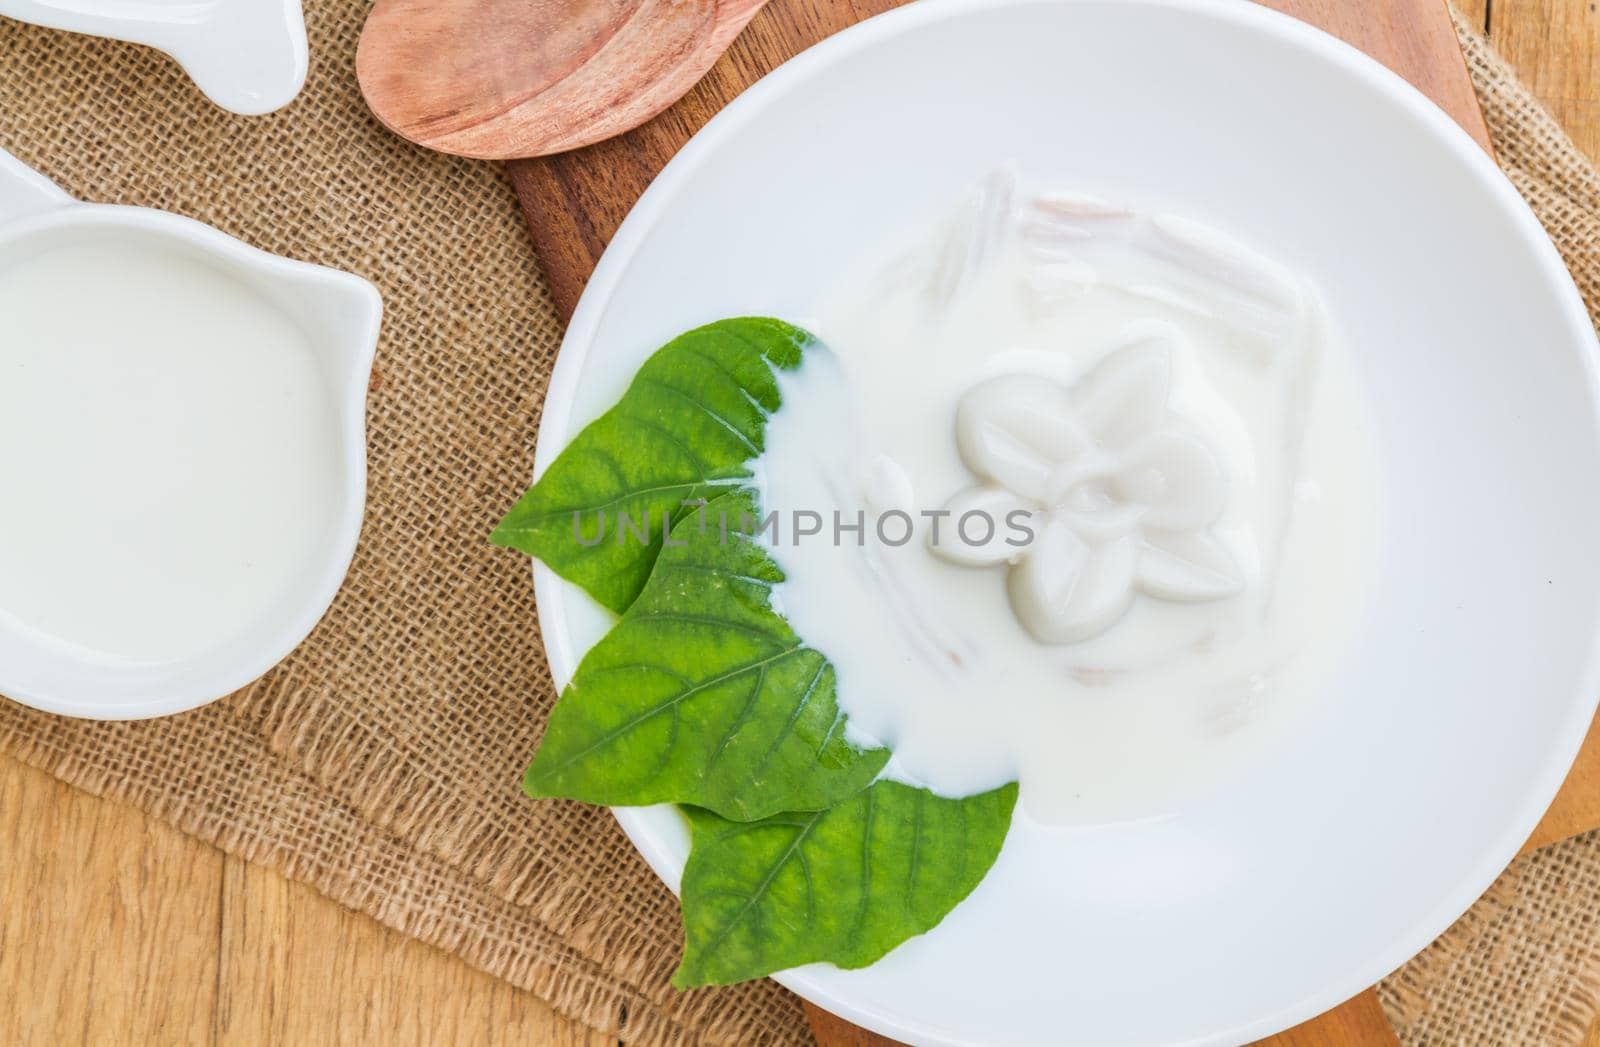 Coconut jelly coconut milk in cup on wood background local dessert thailand. Top view.